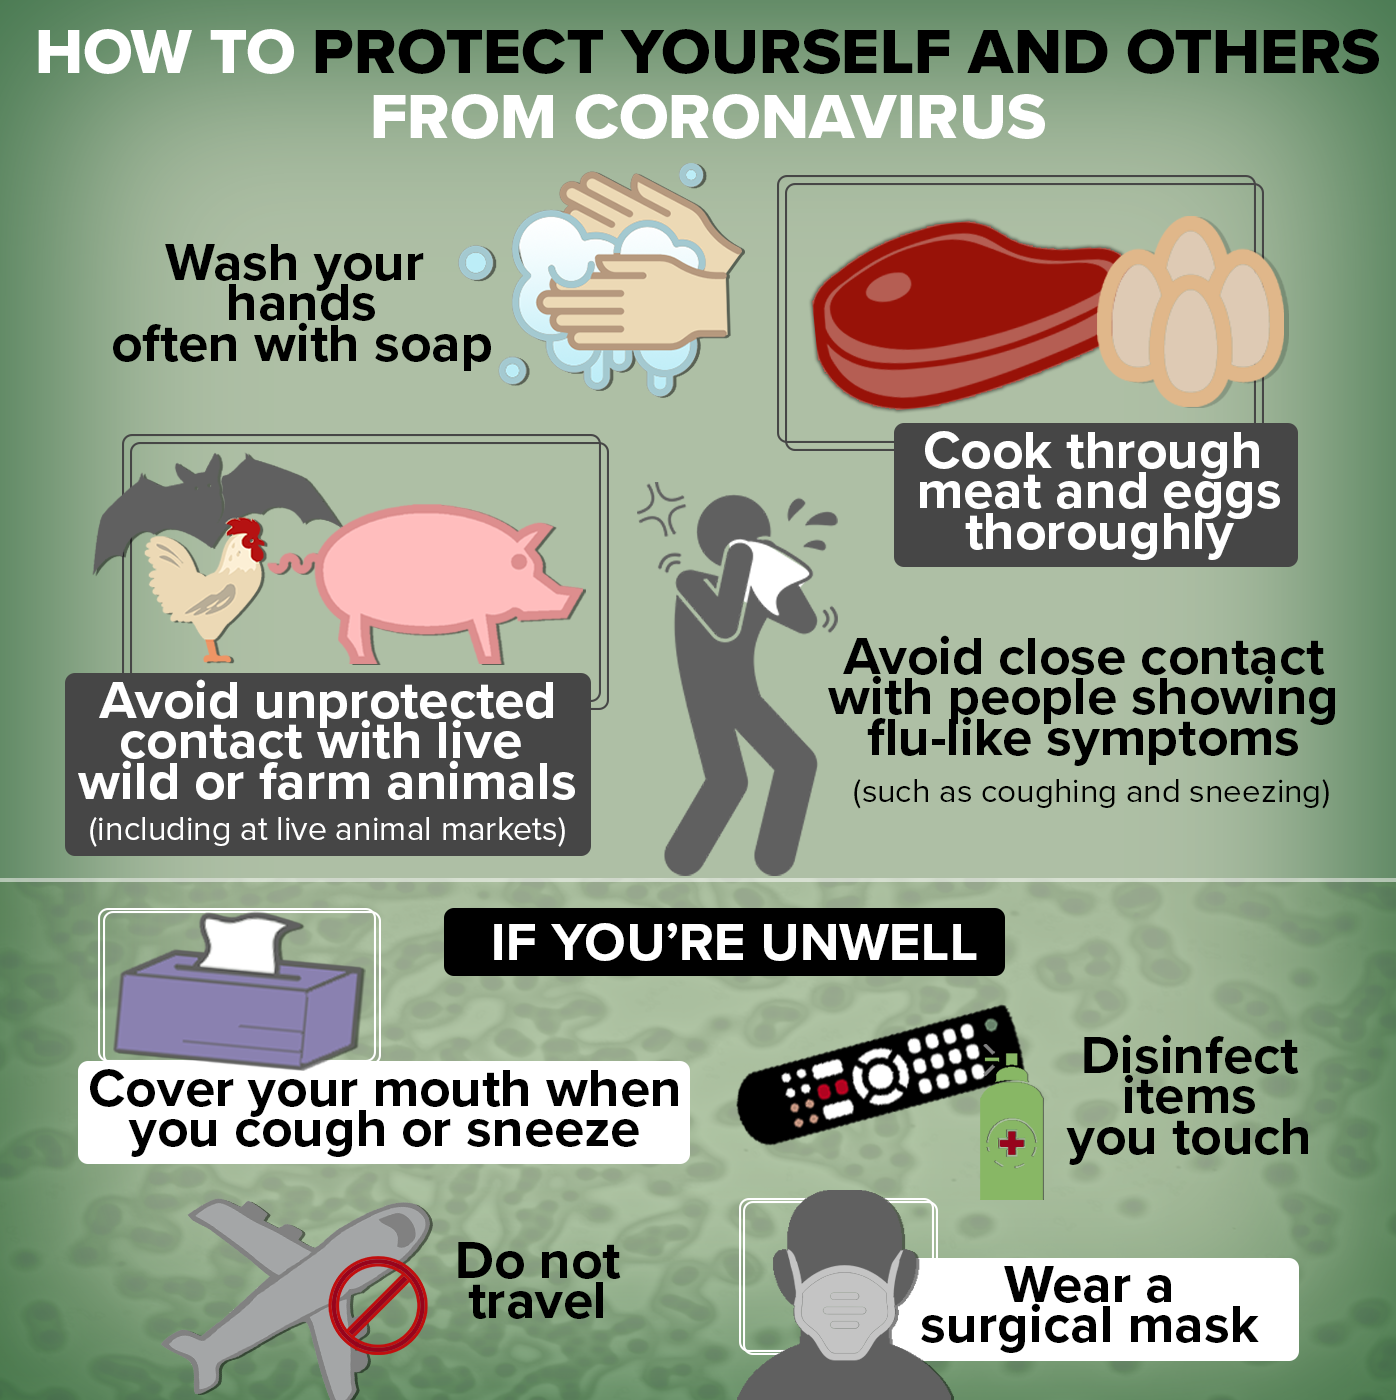 How to protect yourself and others from coronavirus